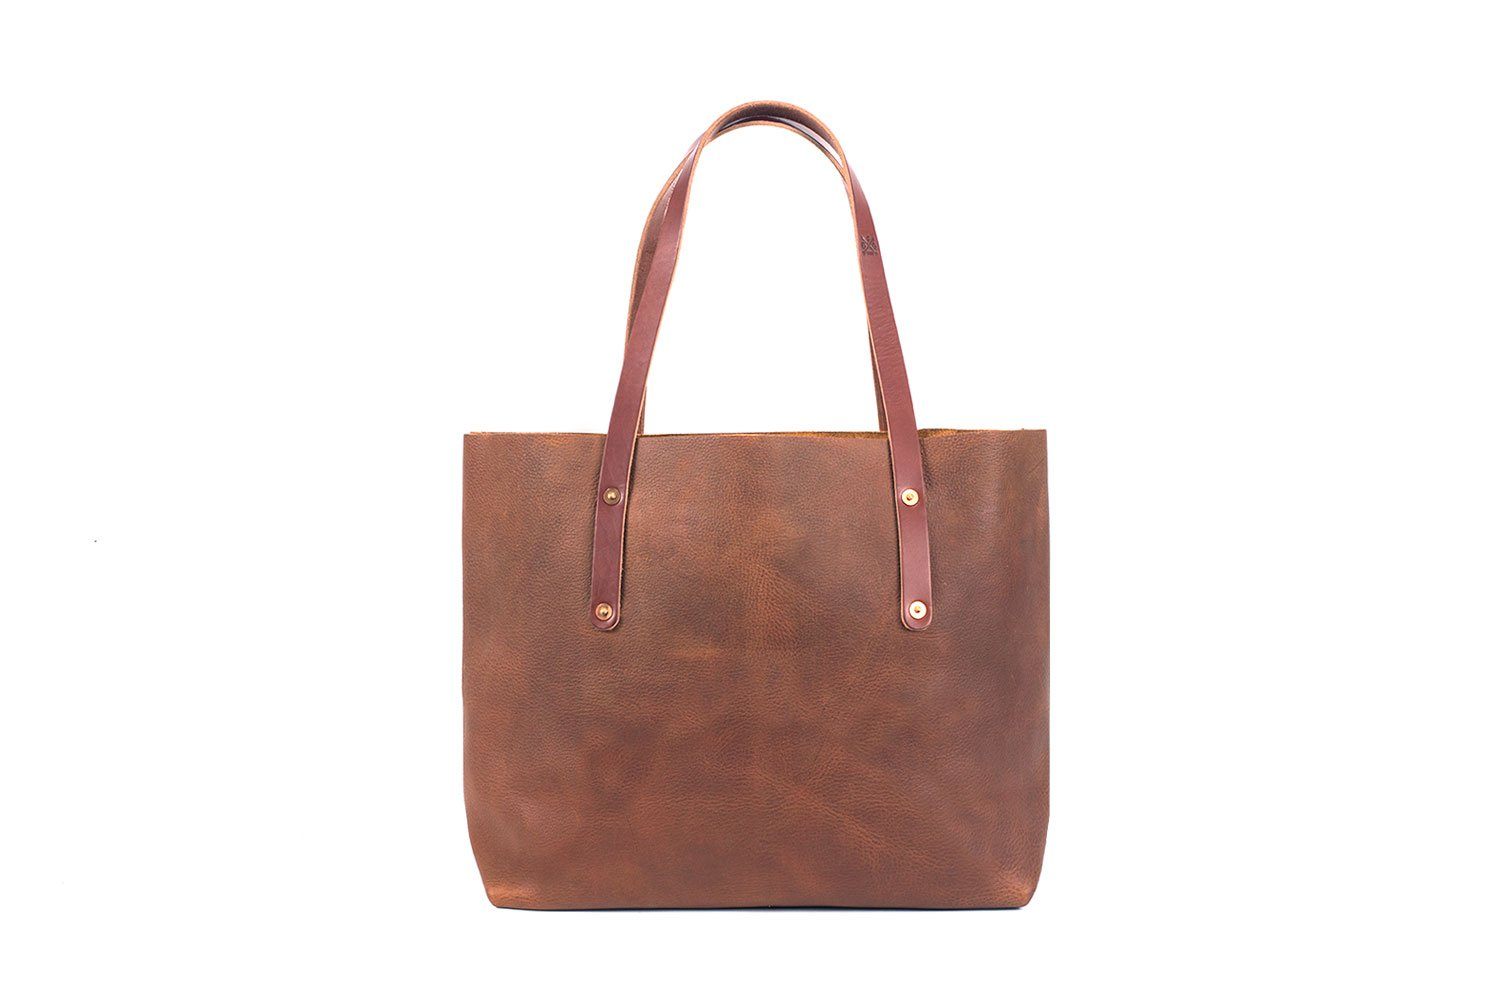 Go Forth Goods Avery Leather Tote Bag - Large - Saddle